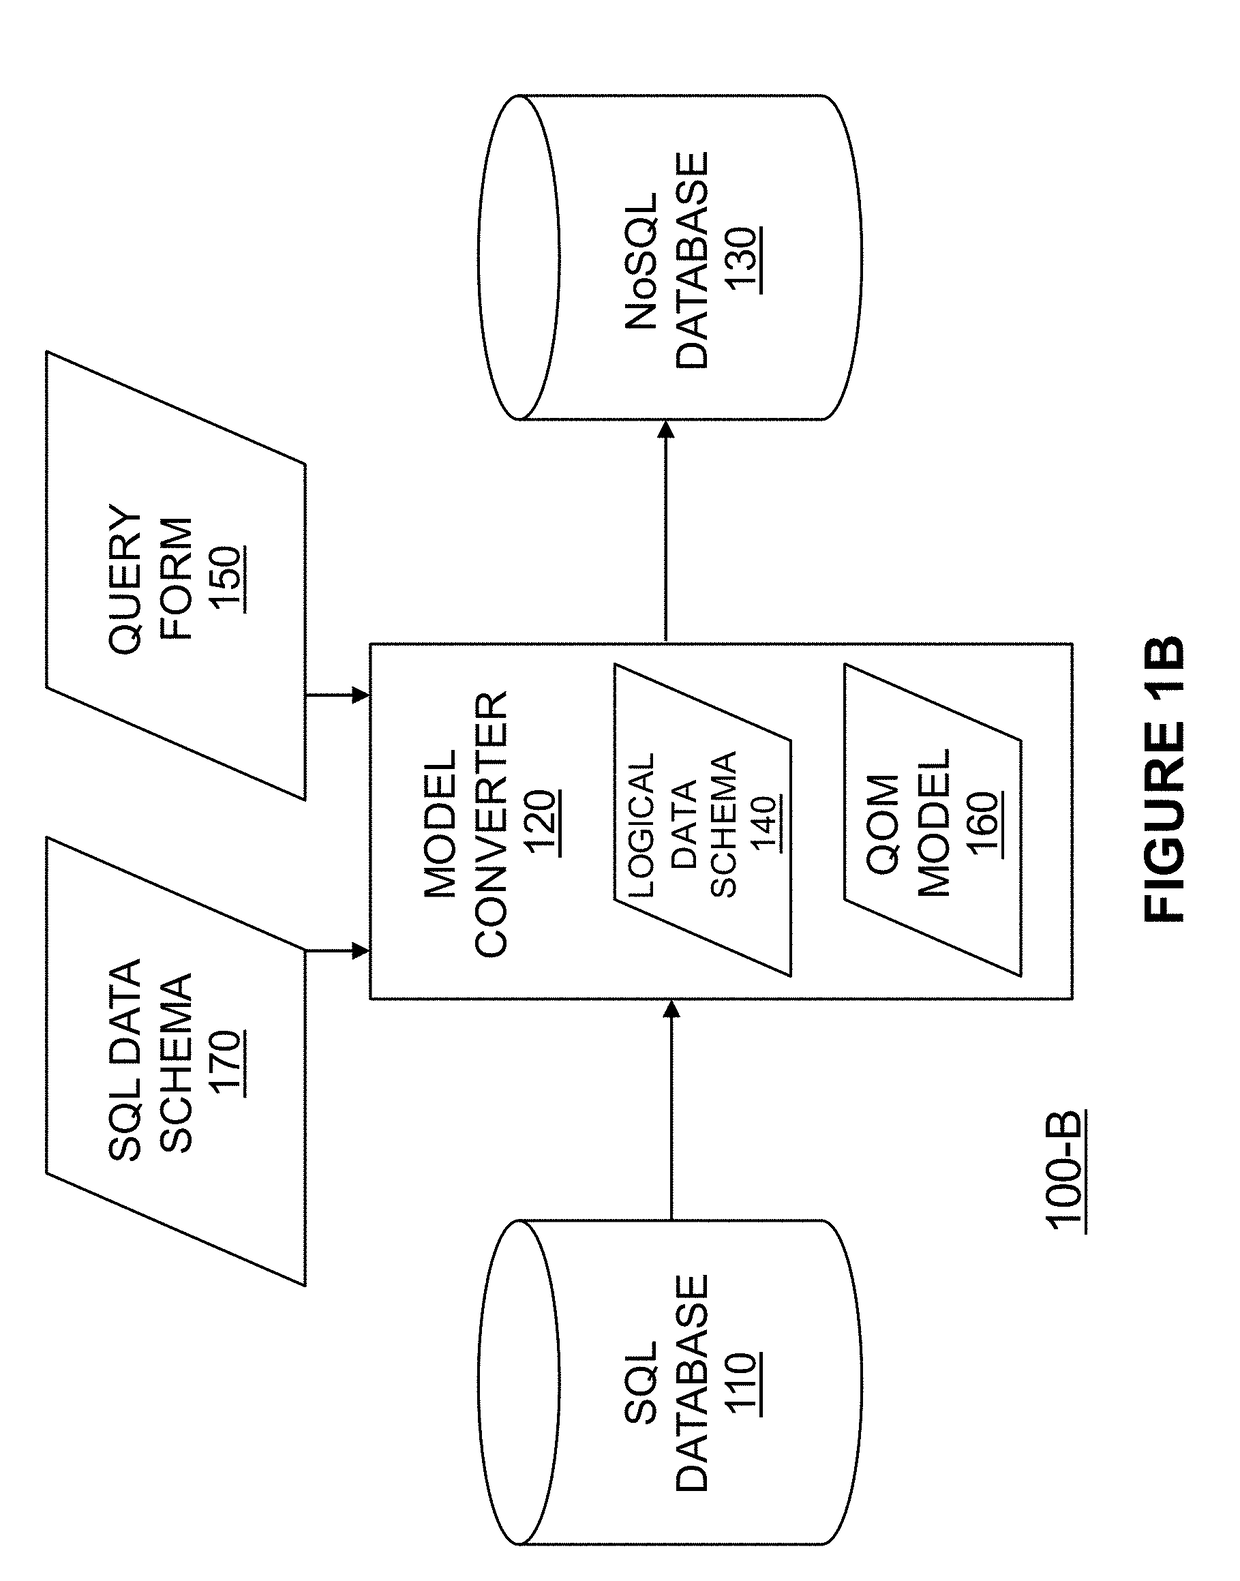 System and Method for Query Optimized Modeling